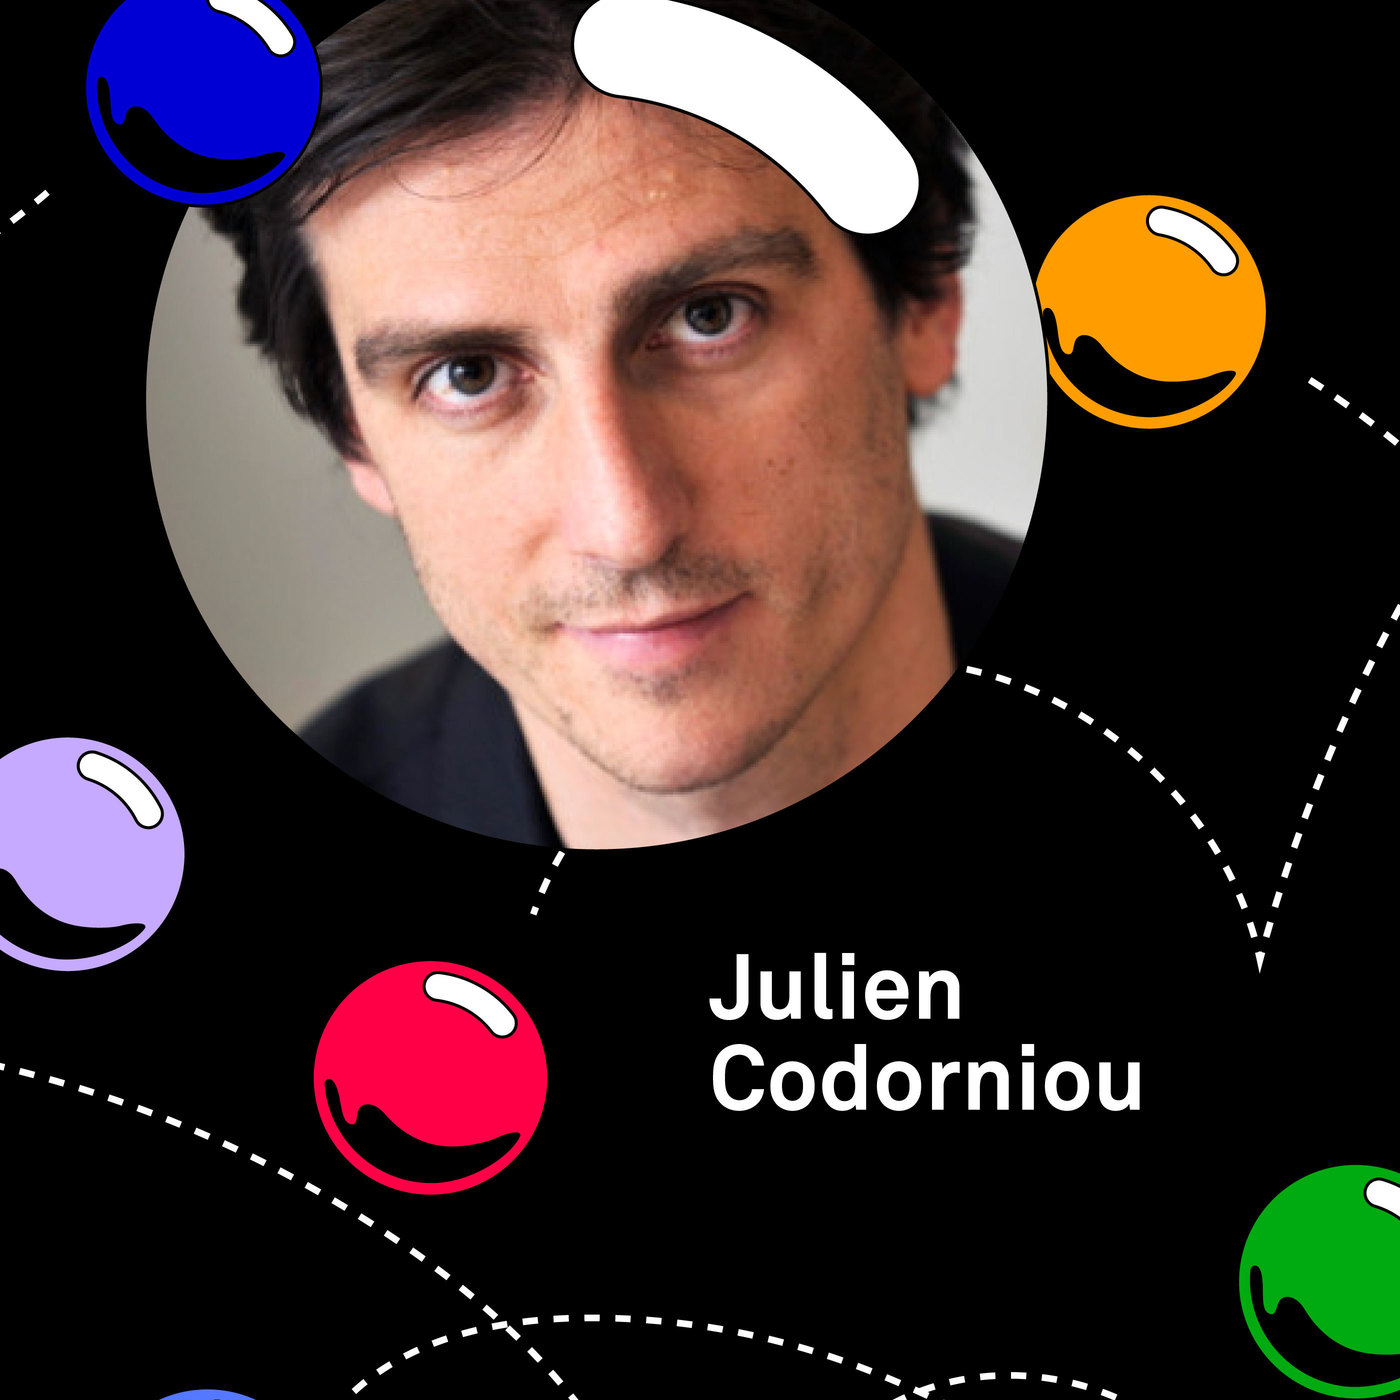 Facebook Workplace’s Julien Codorniou on turning companies into communities